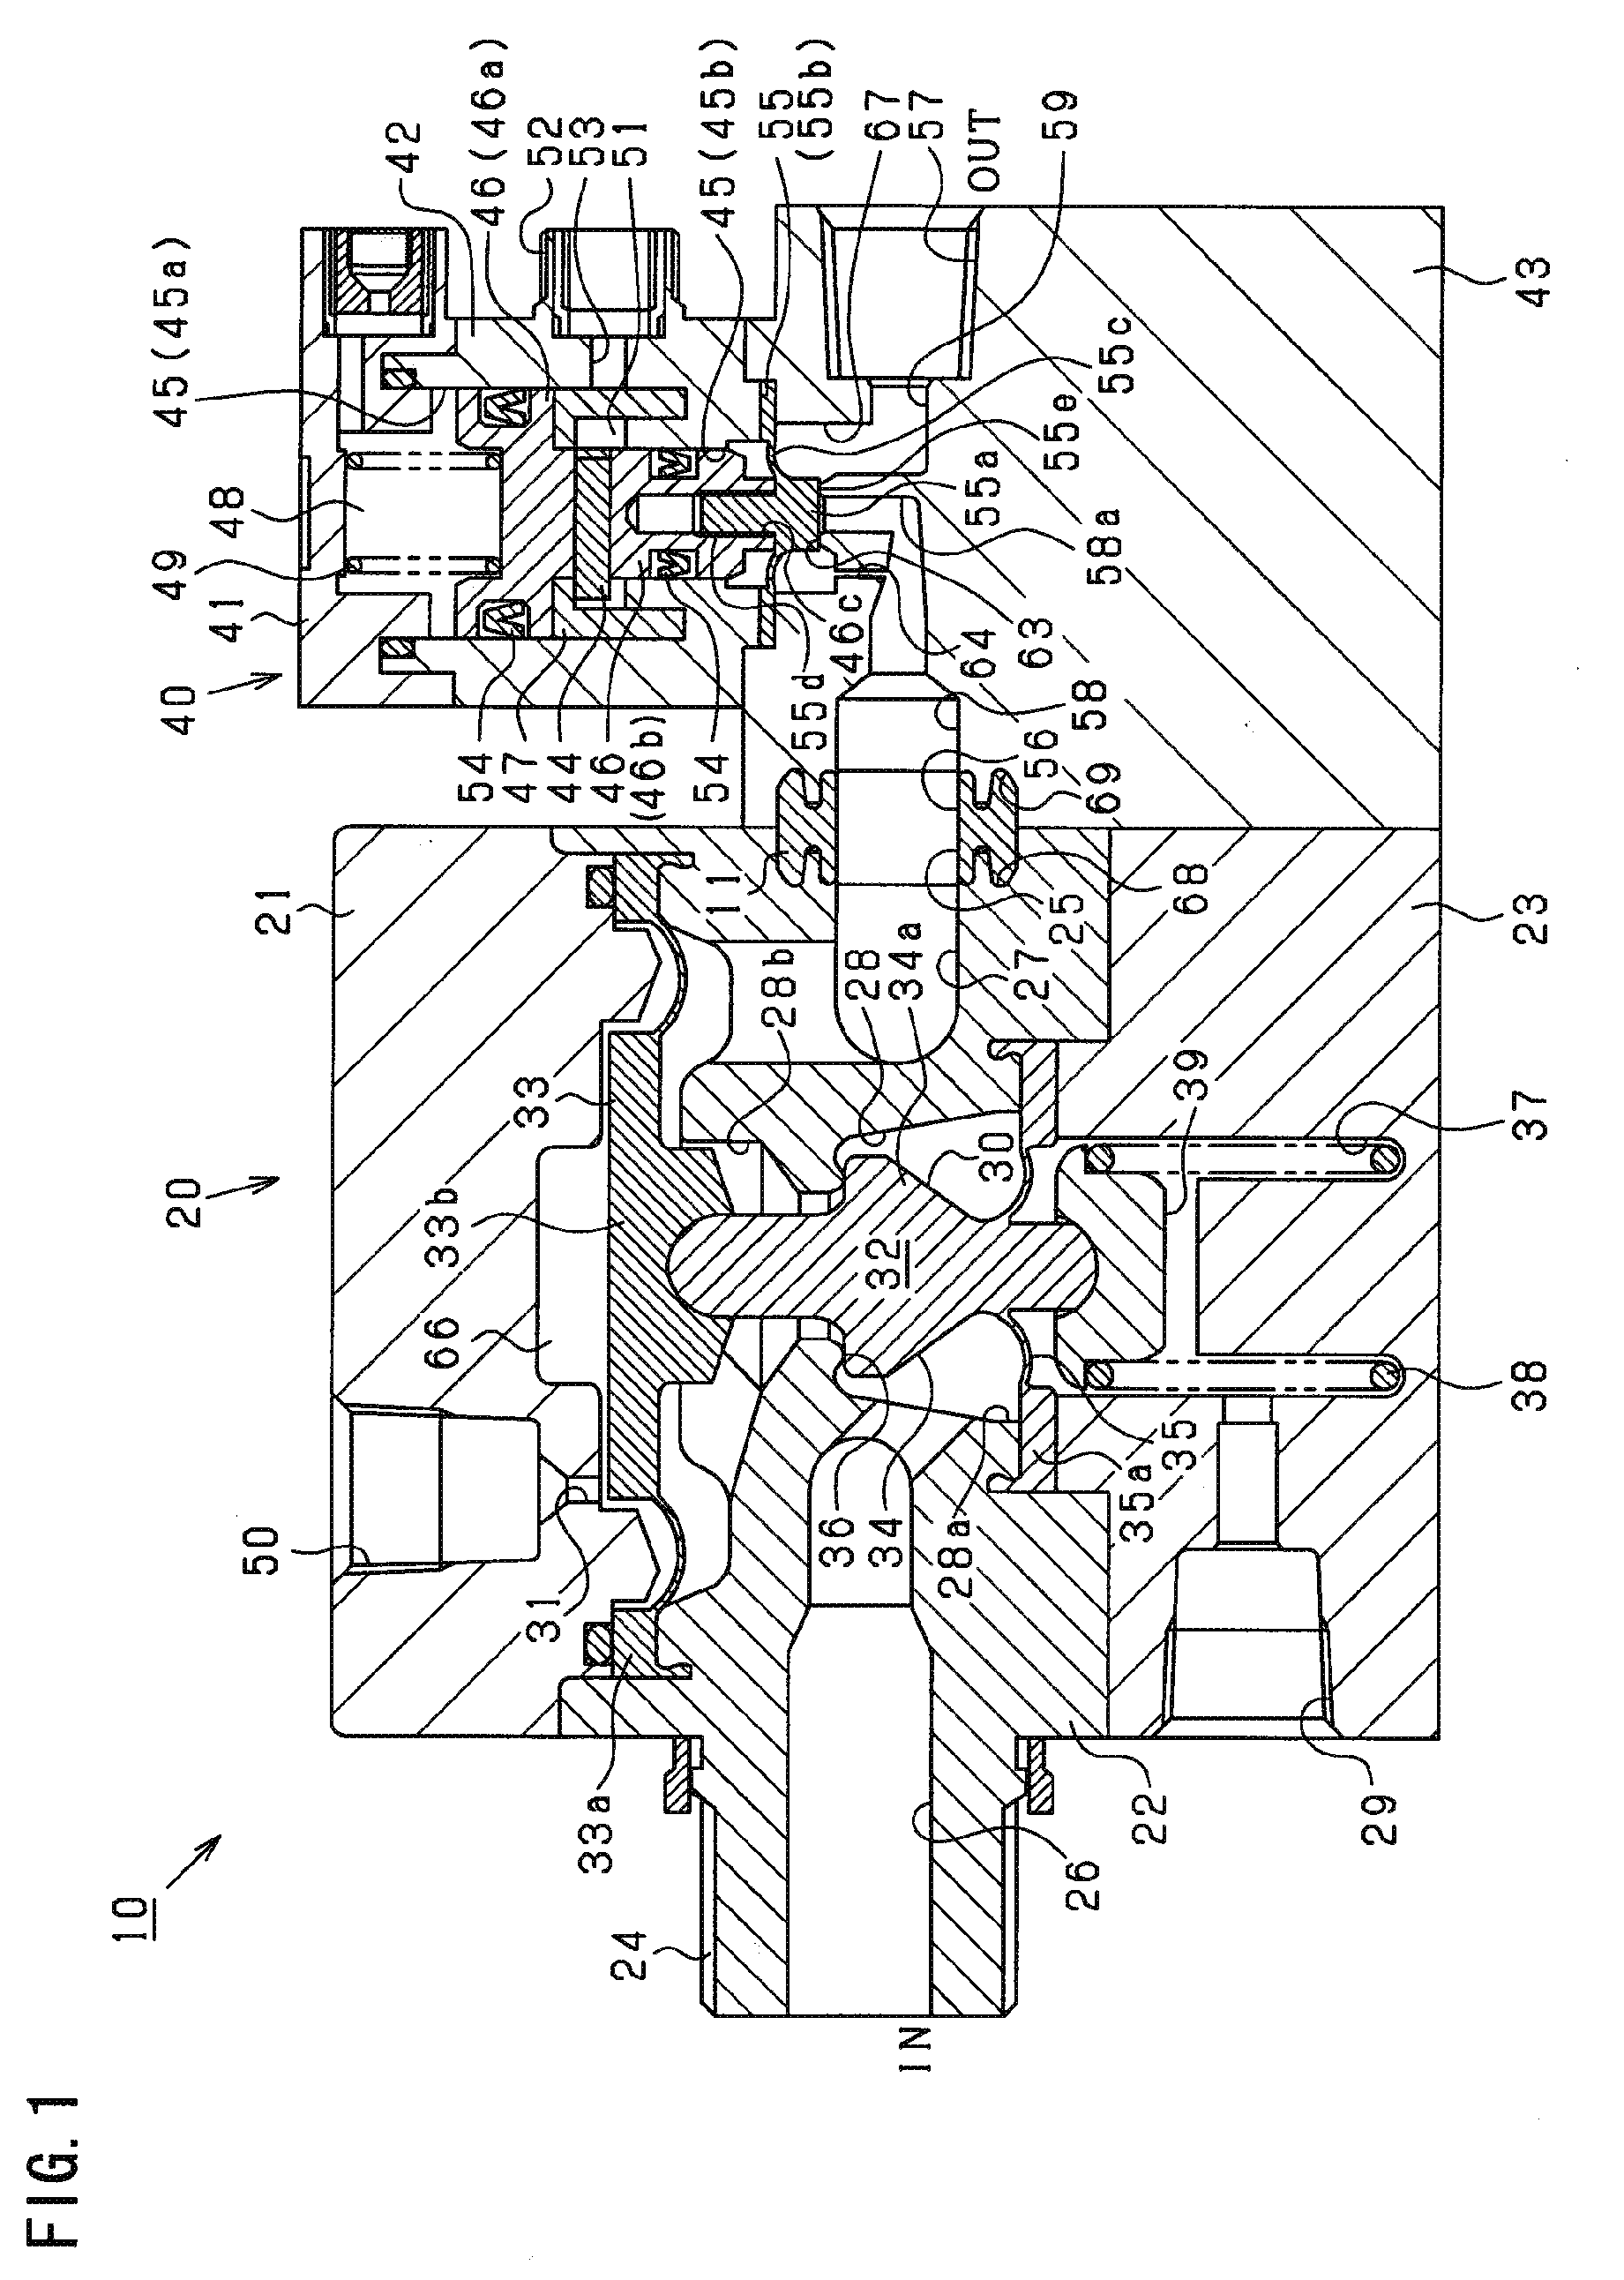 Flow rate control device